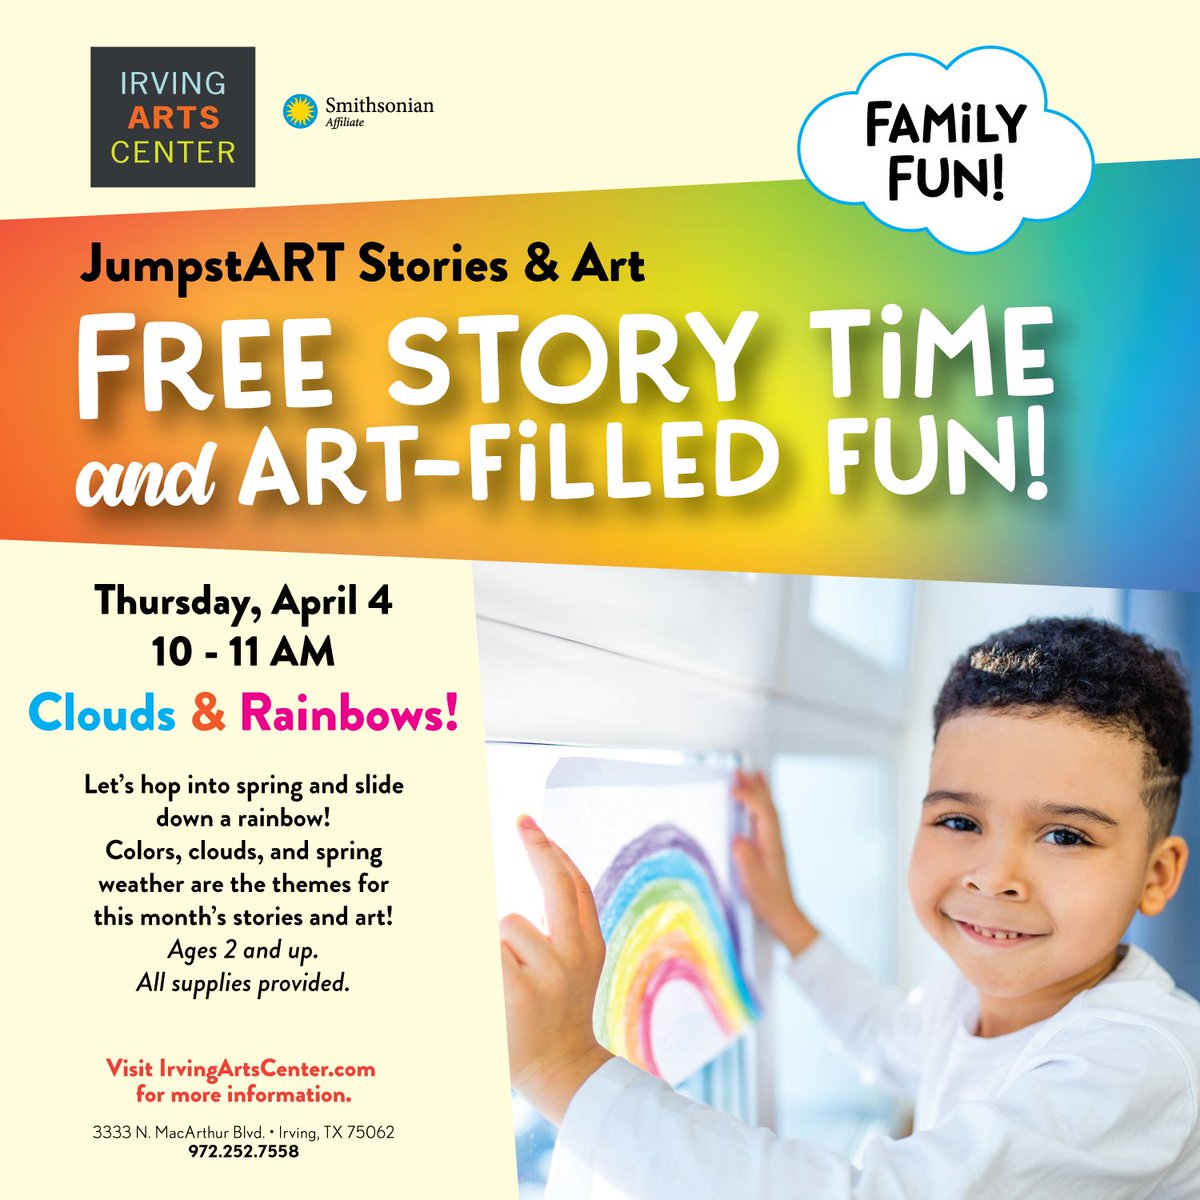 Don't forget to stop by for April's JumpstART tomorrow! THIS IS OUR LAST UNTIL SEPTEMBER! WE WILL BE CLOSED FOR RENOVATIONS MAY - AUG